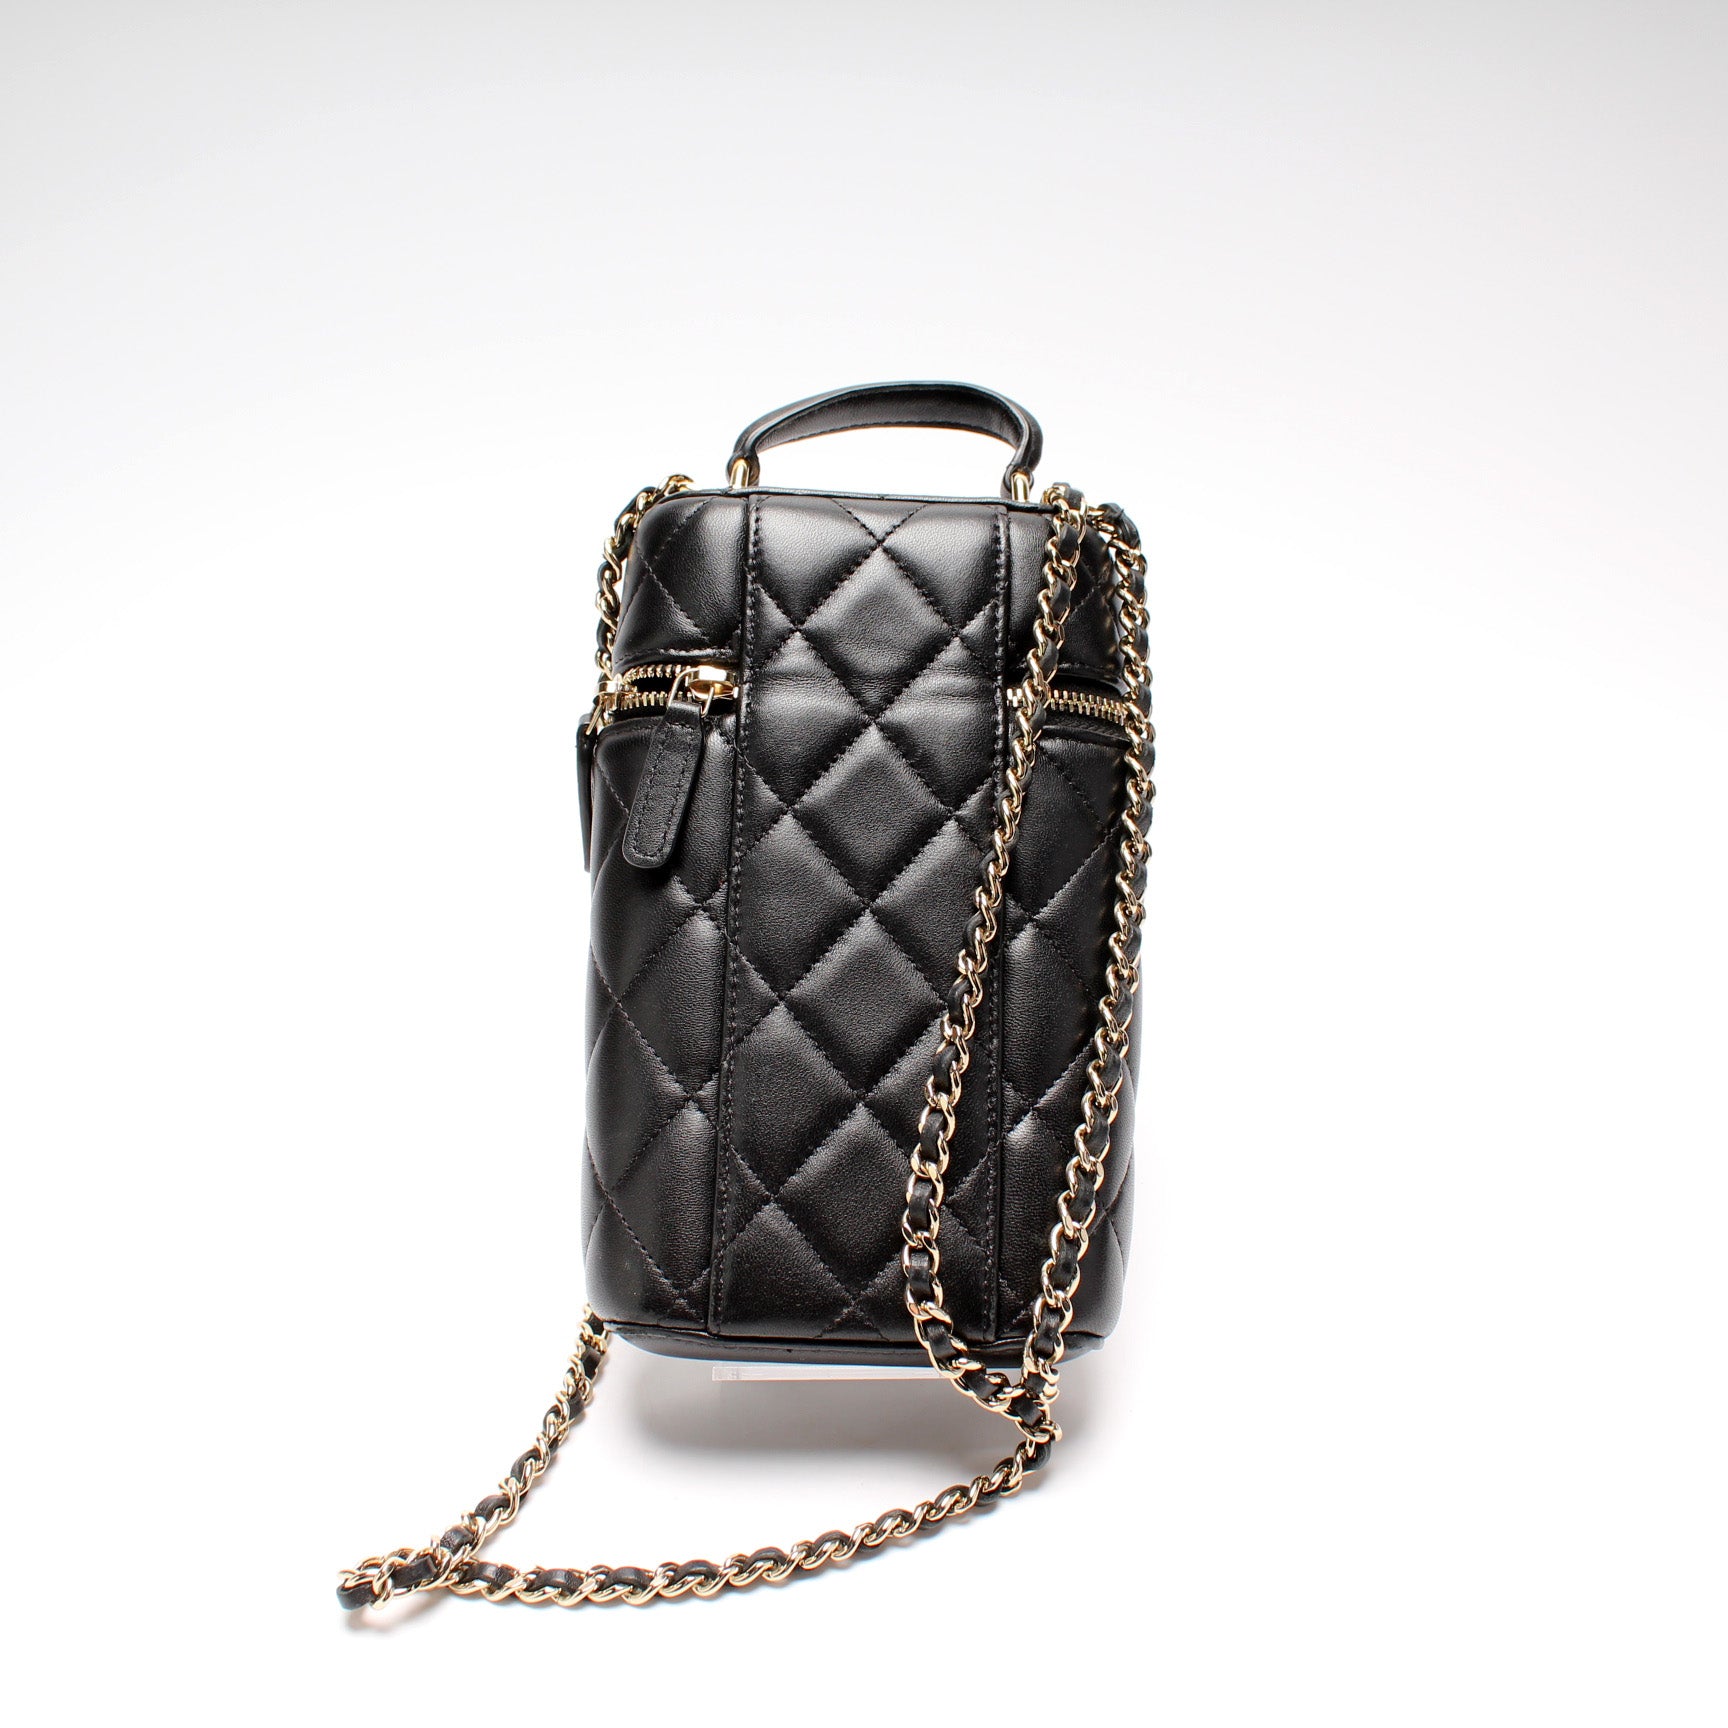 Chanel Lambskin Quilted Flap Phone Holder with Chain Black Lilac